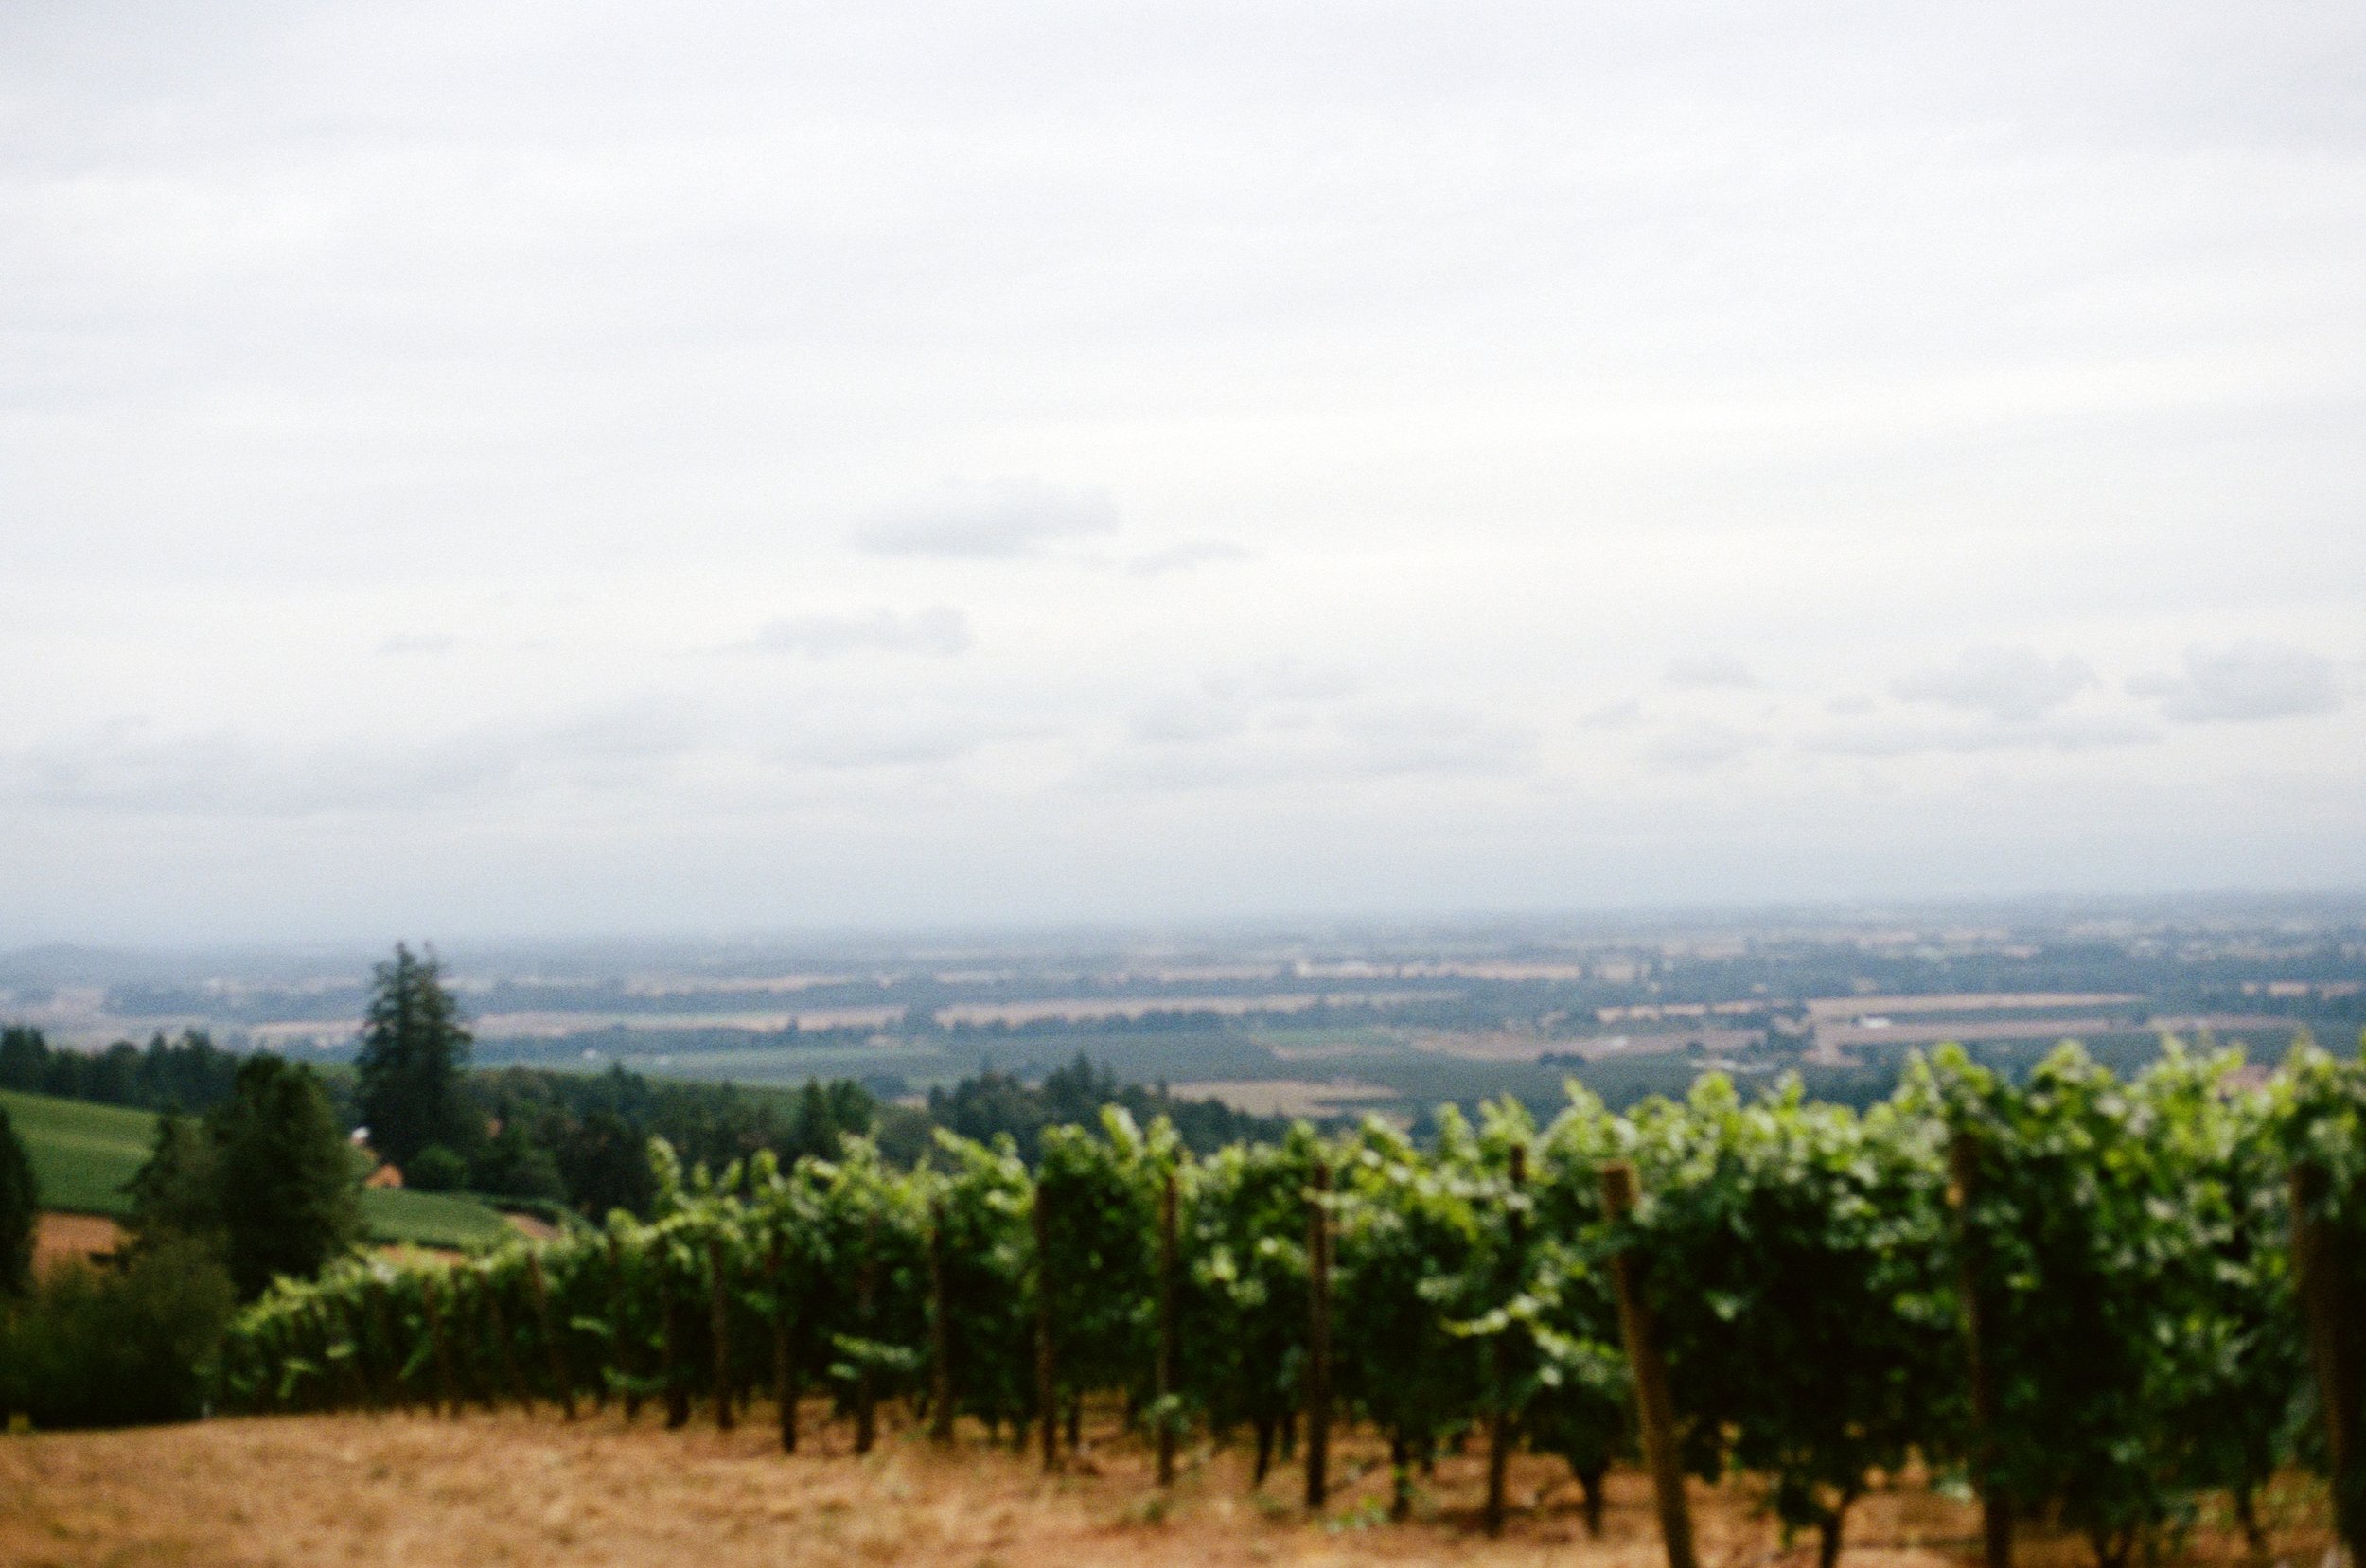 landscape photo with vineyards and grape vines overlooking sky